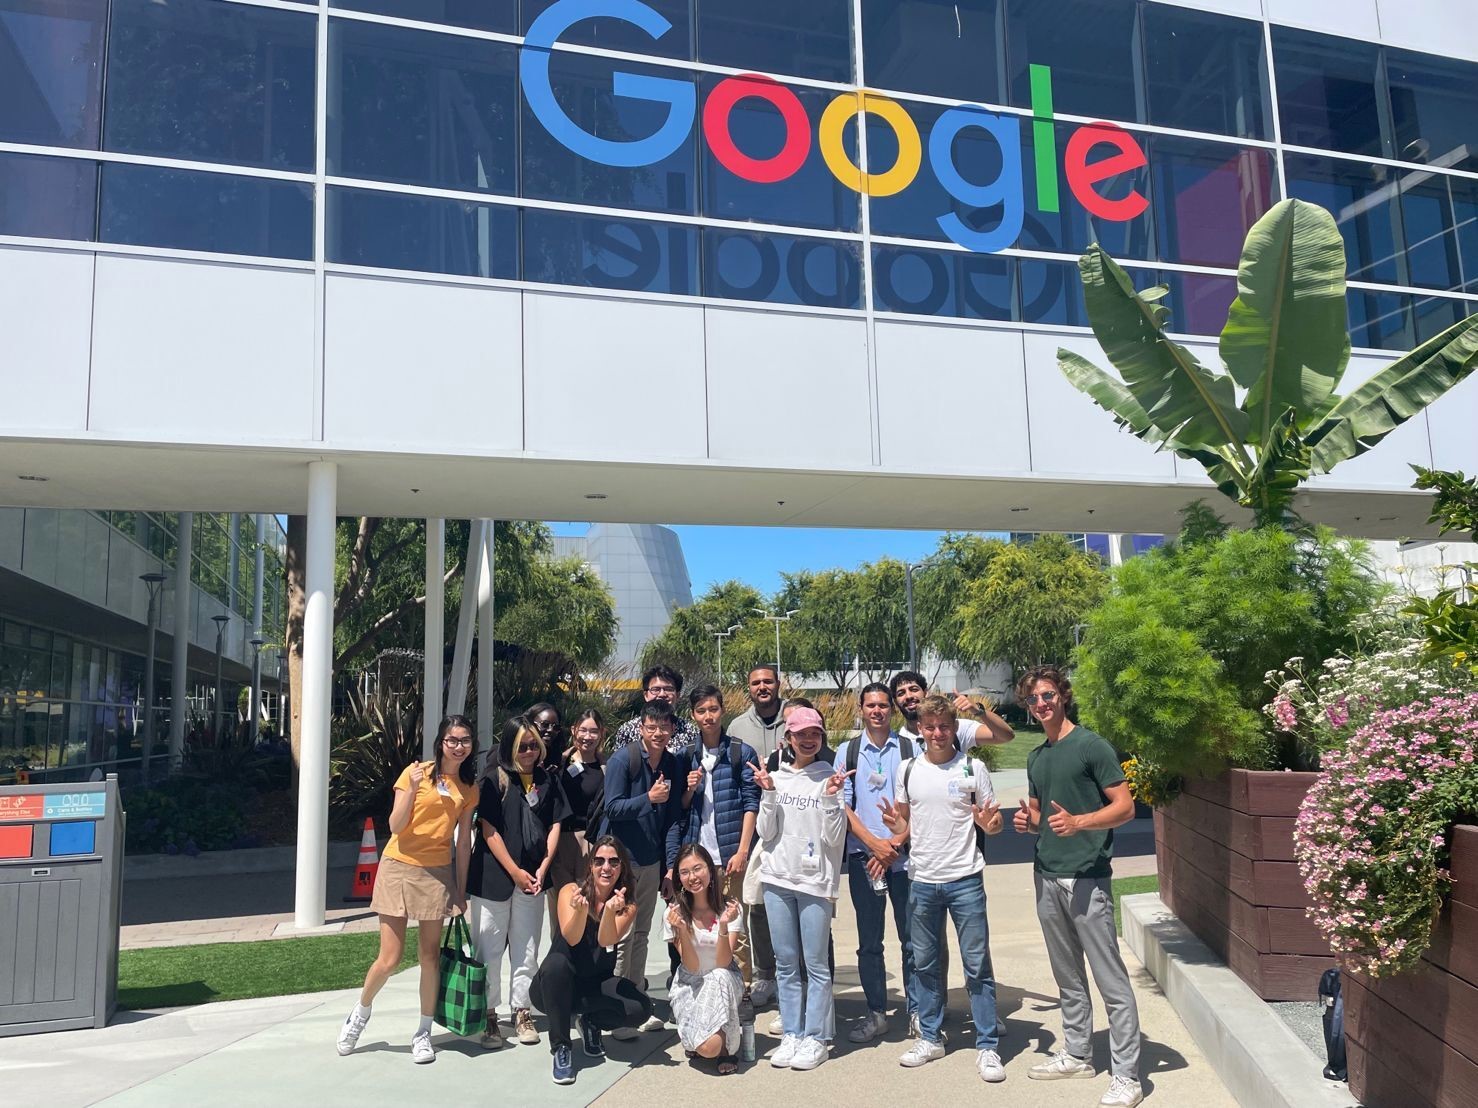 Kien and fellow SVIC program participants visiting Google's headquarter in the Silicon Valley